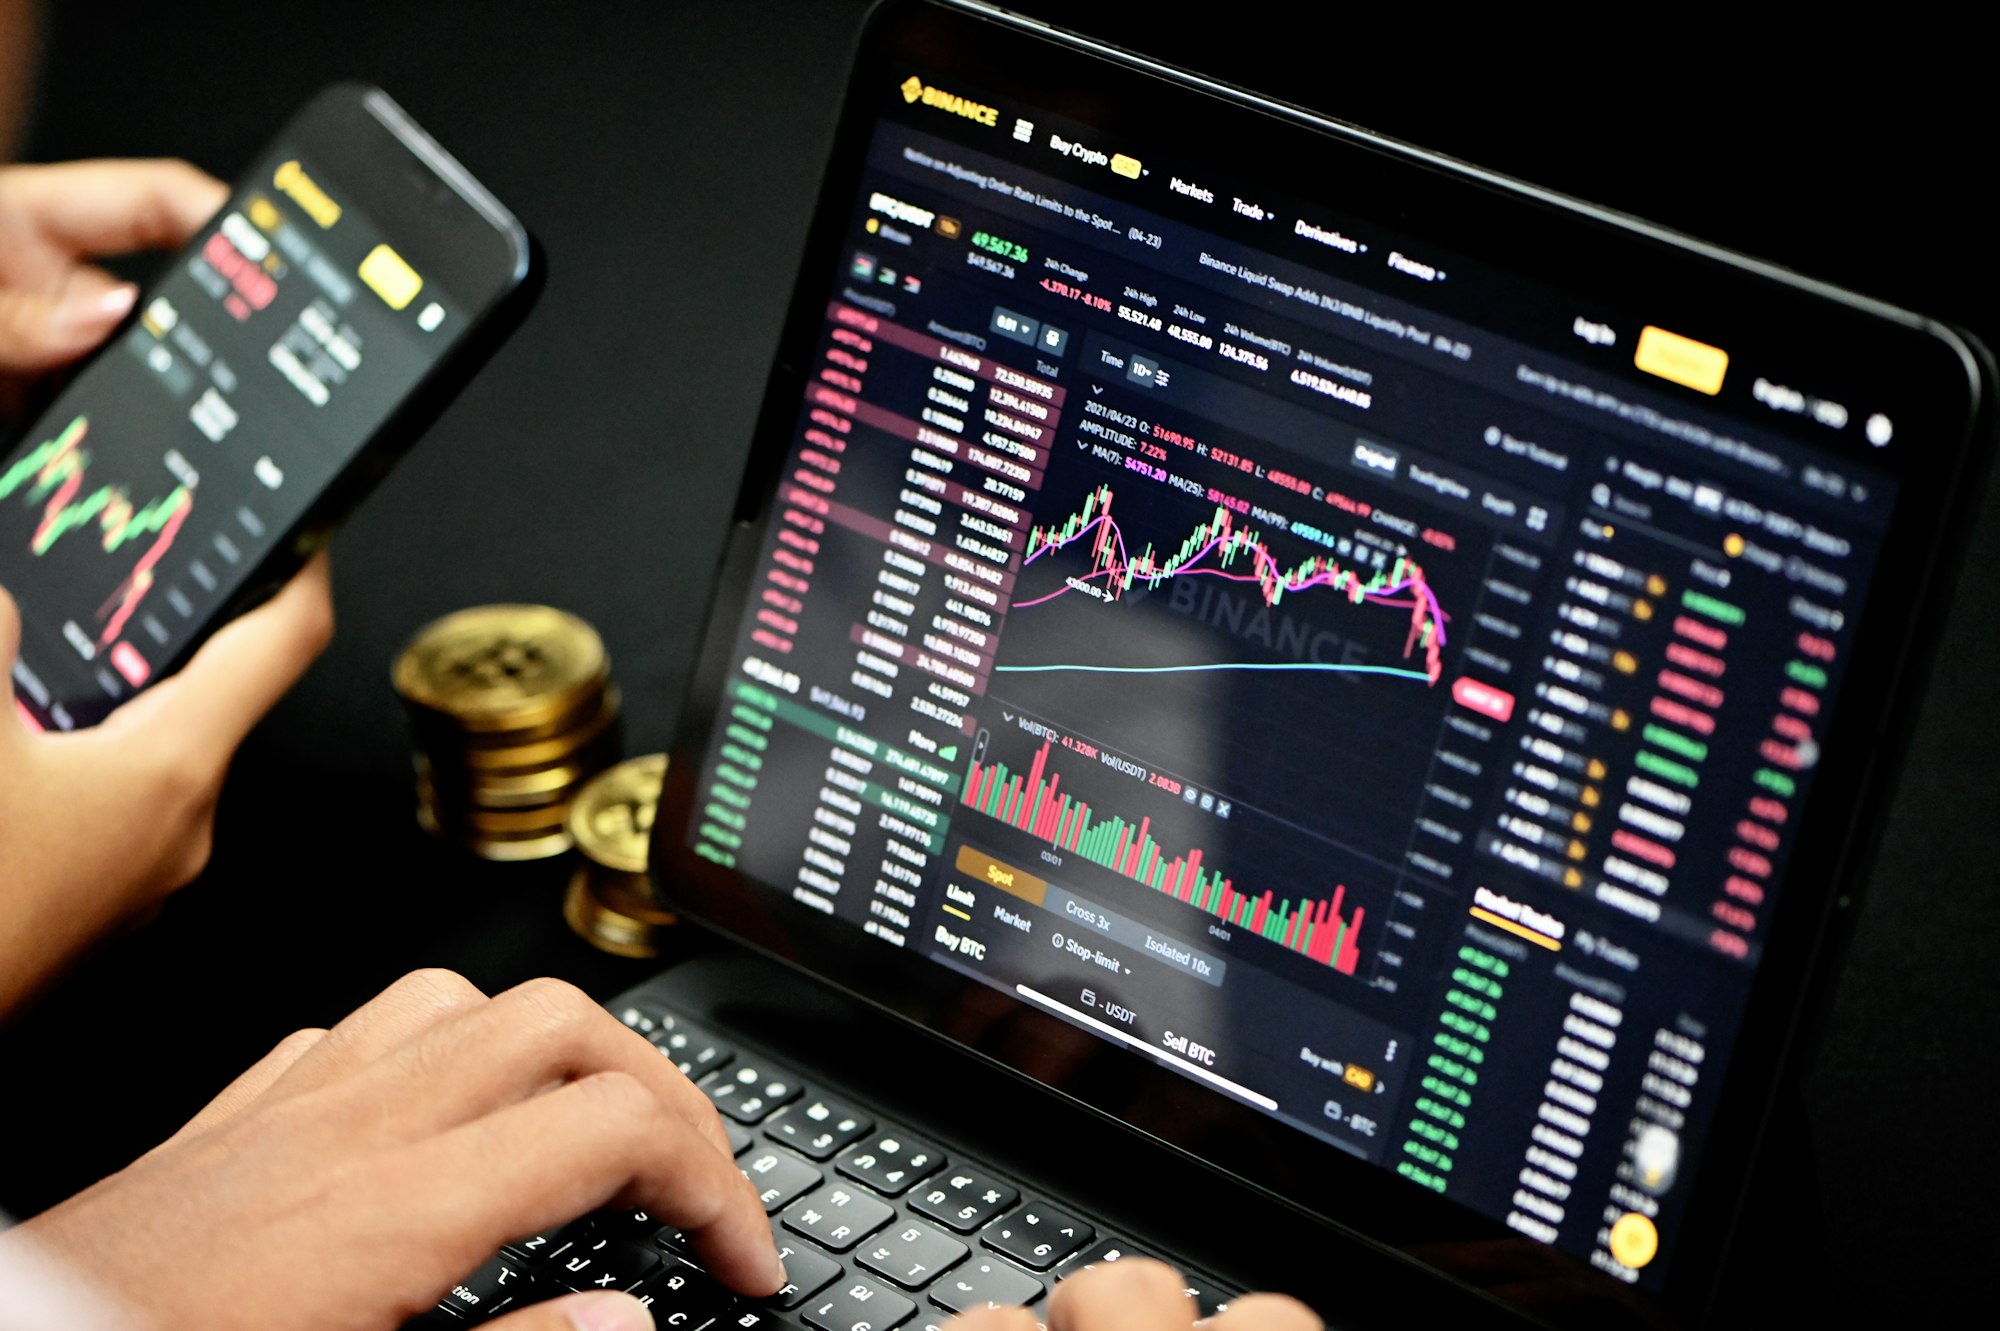 Two investors are trading cryptocurrency on Binance